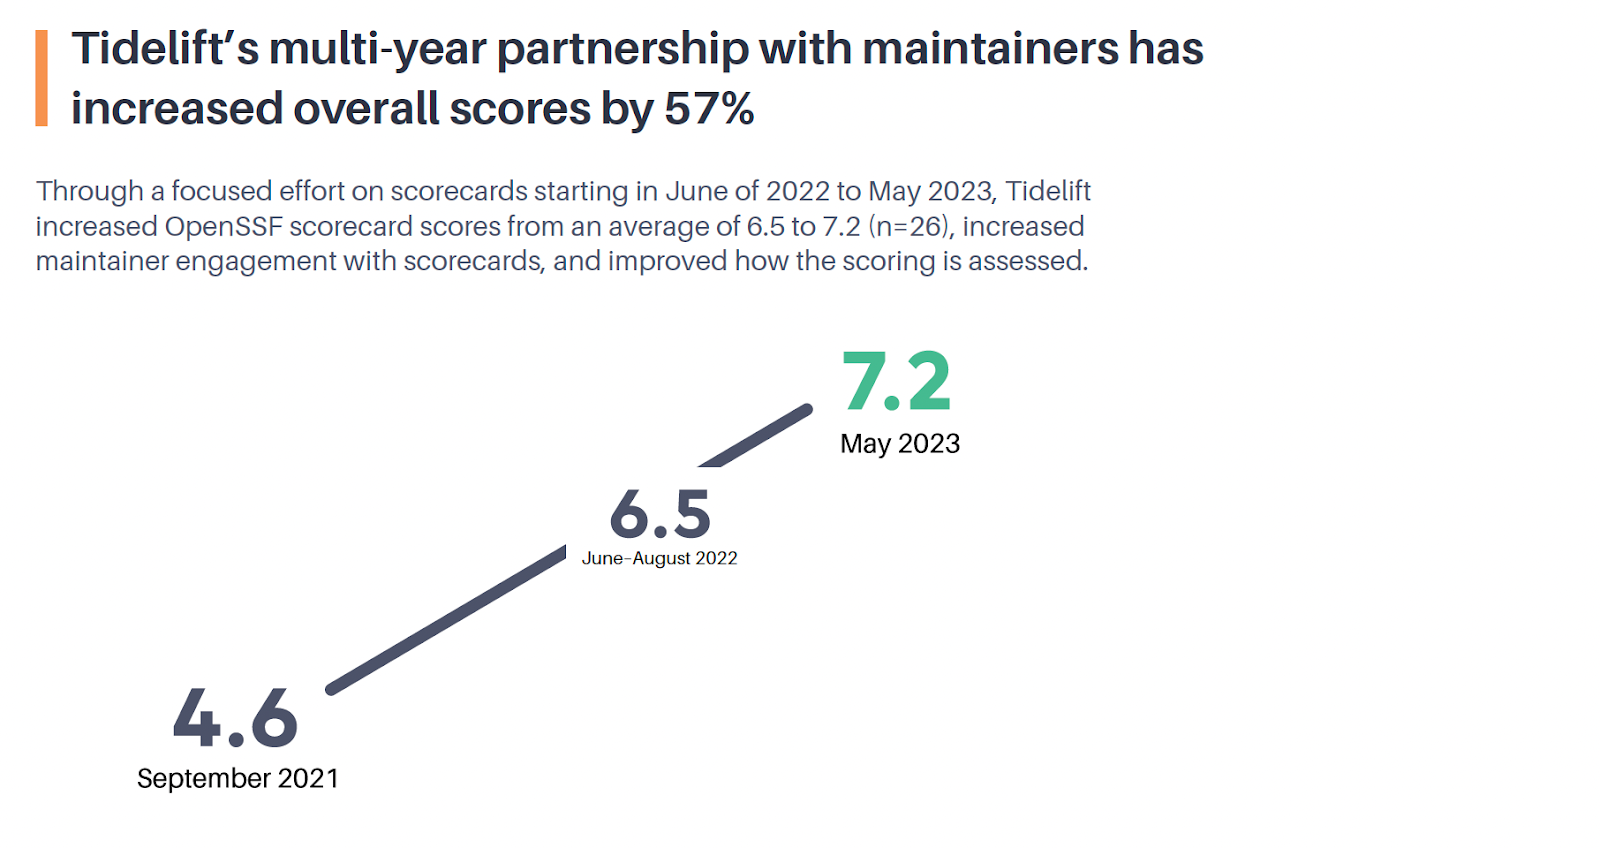 Tidelift's multi-year partnership with maintainers has increased overall OpenSSF scorecard scores by 57%